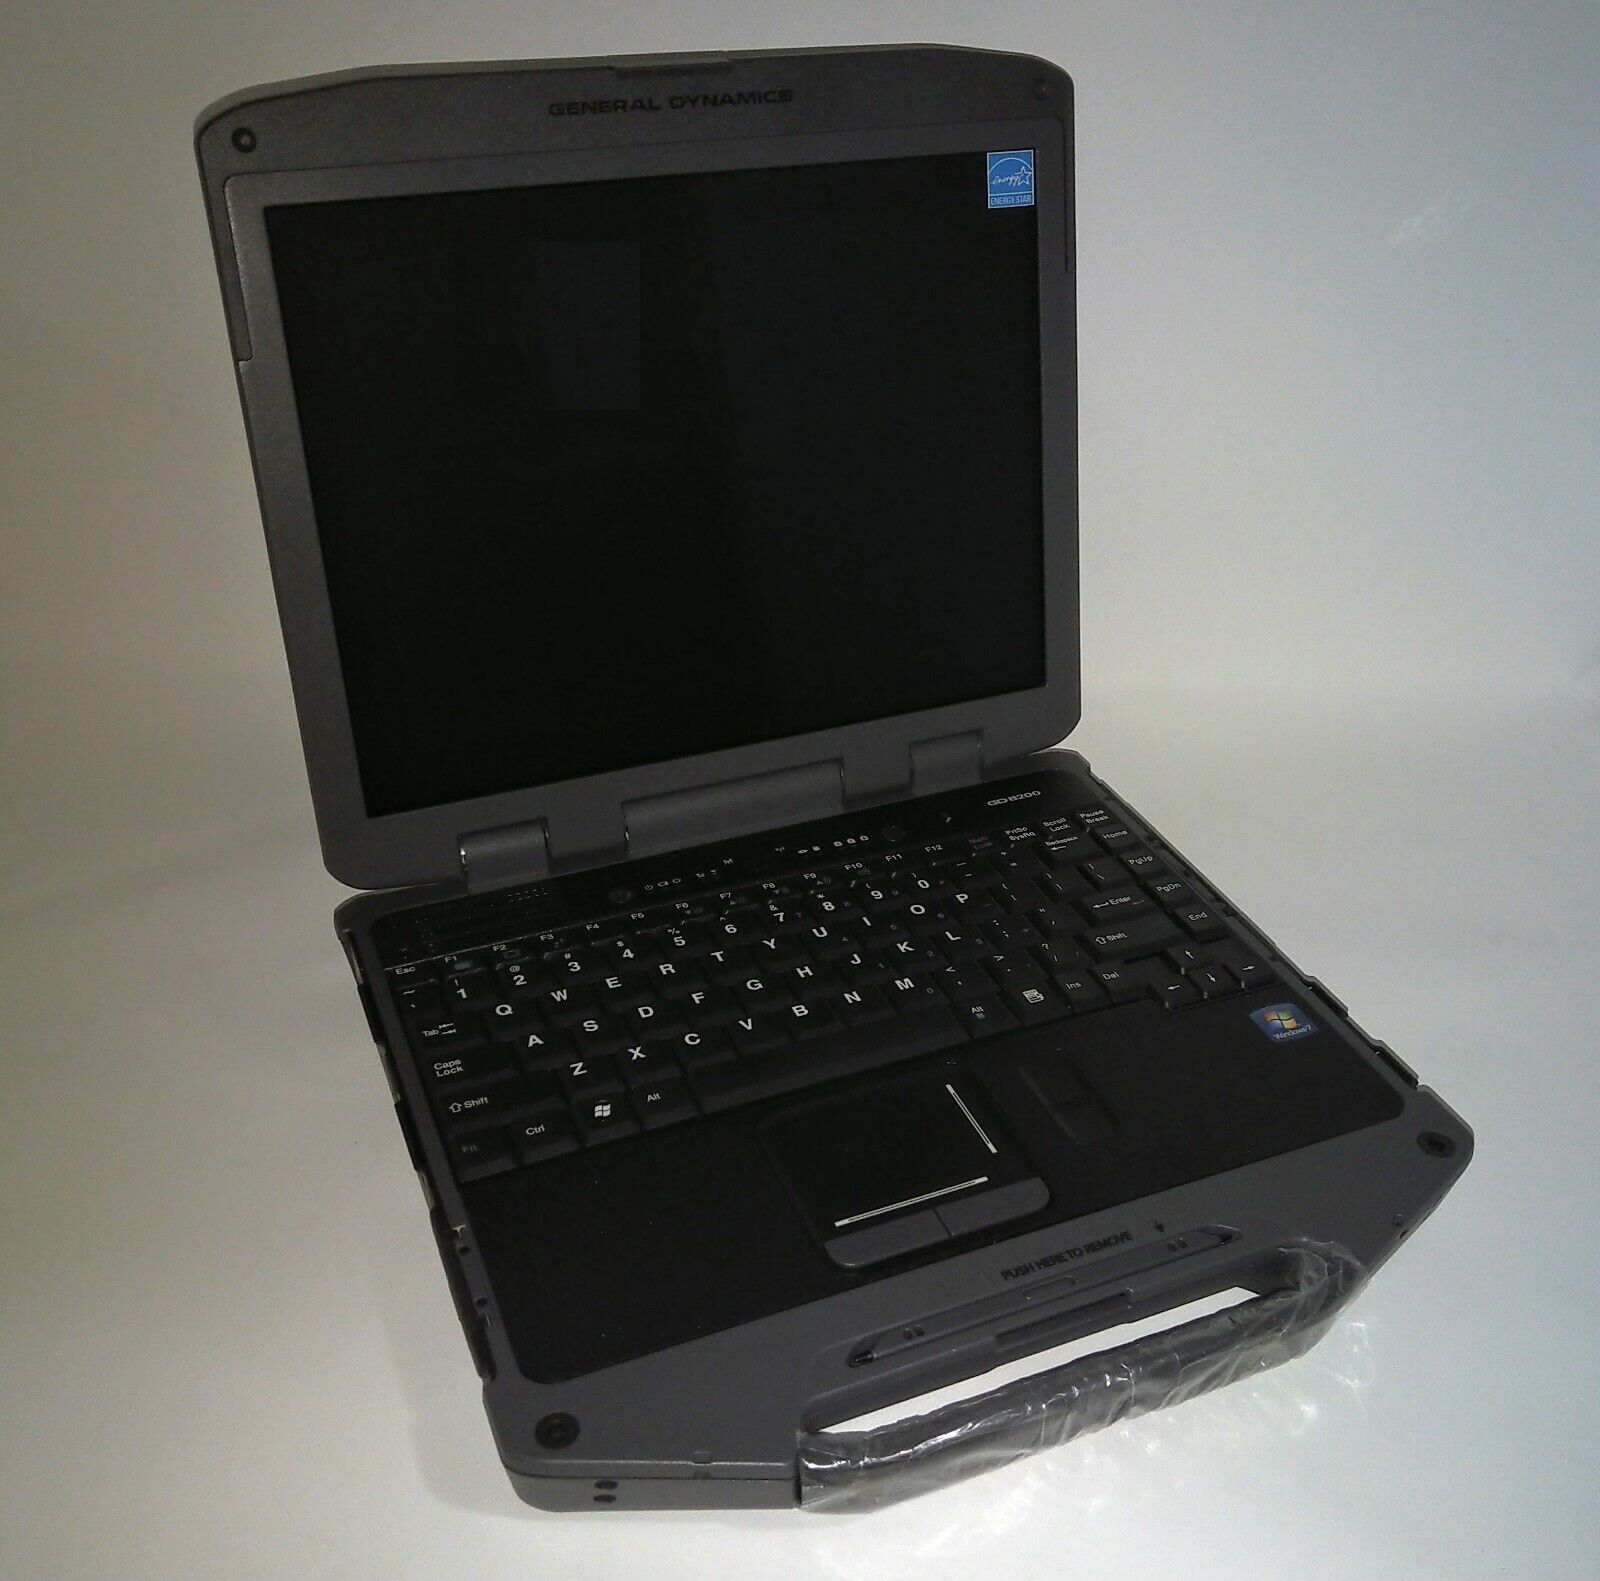 General Dynamics GD8200 Rugged Military Laptop Base Core i7 8GB RAM - NEW IN BOX